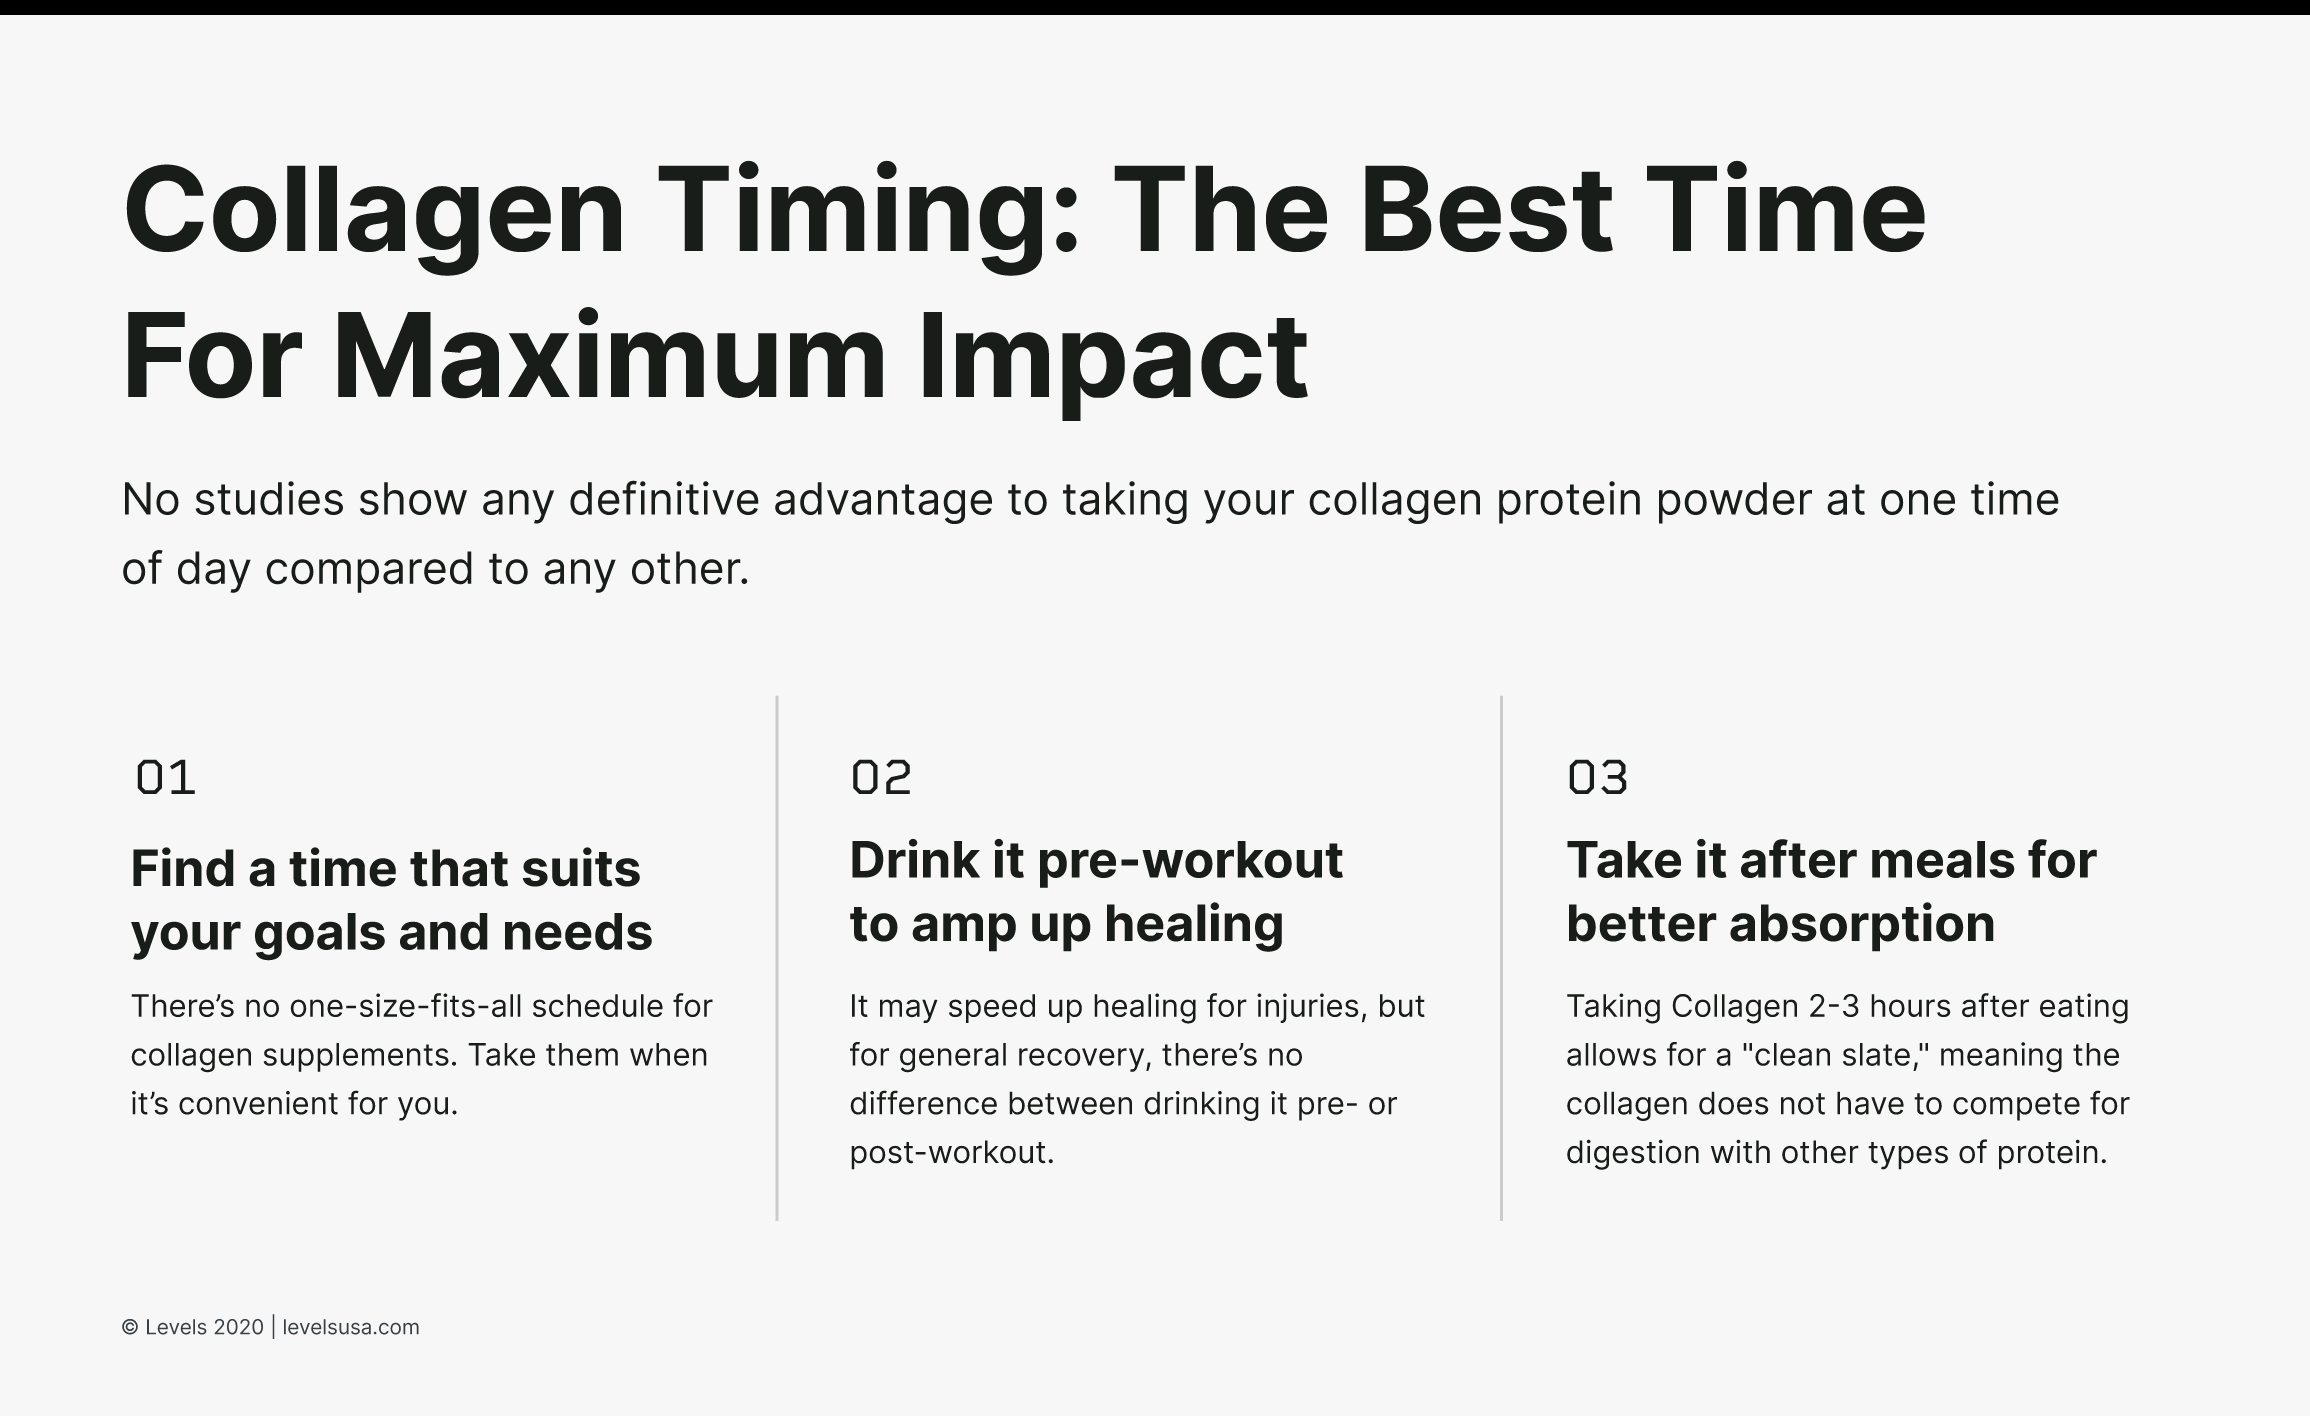 Collagen Timing: The best time For Maximum Impact - Infographic